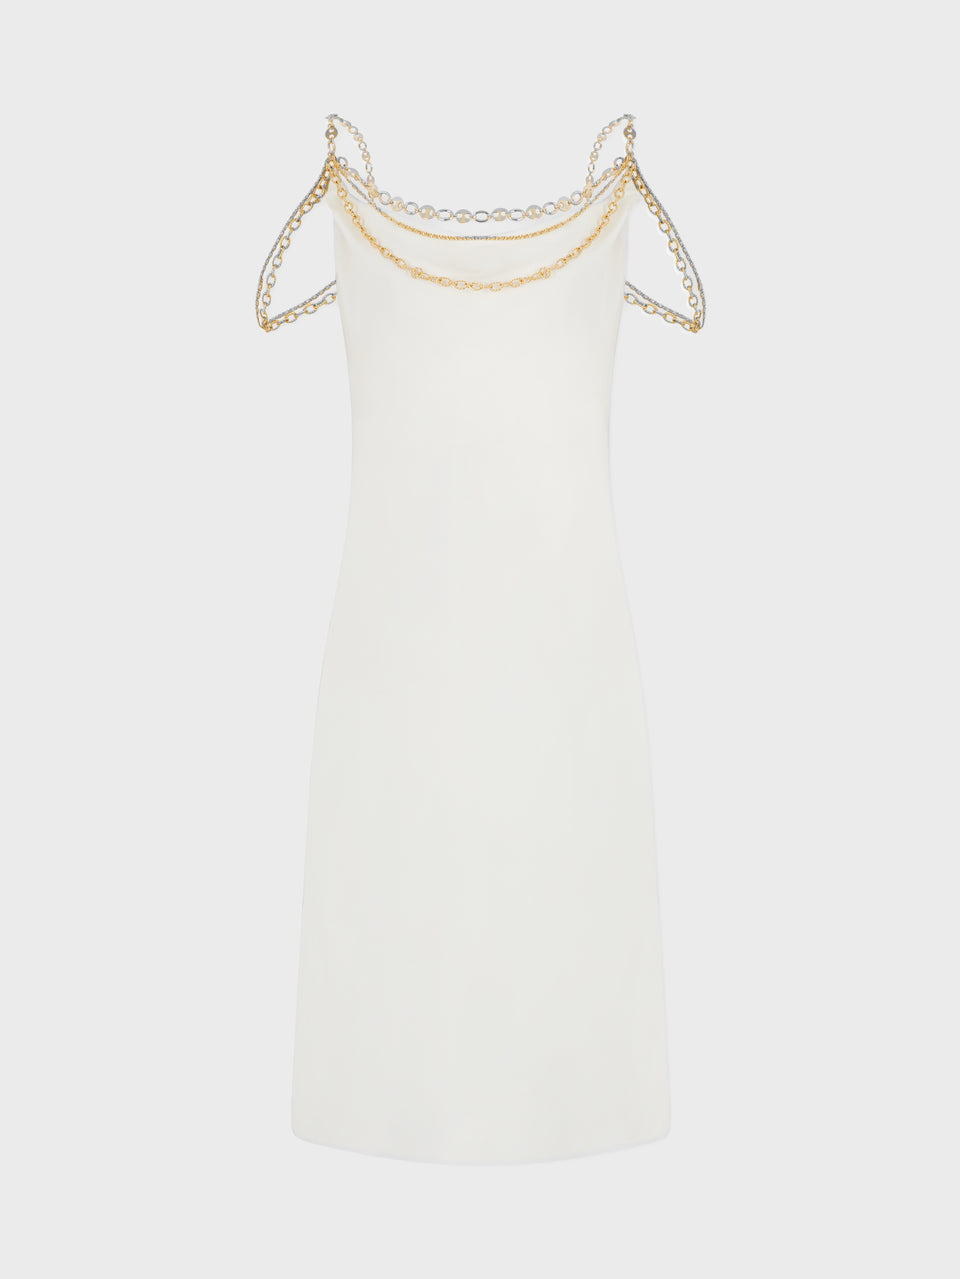 Light pleated white dress embellished with  "eight" signature chain